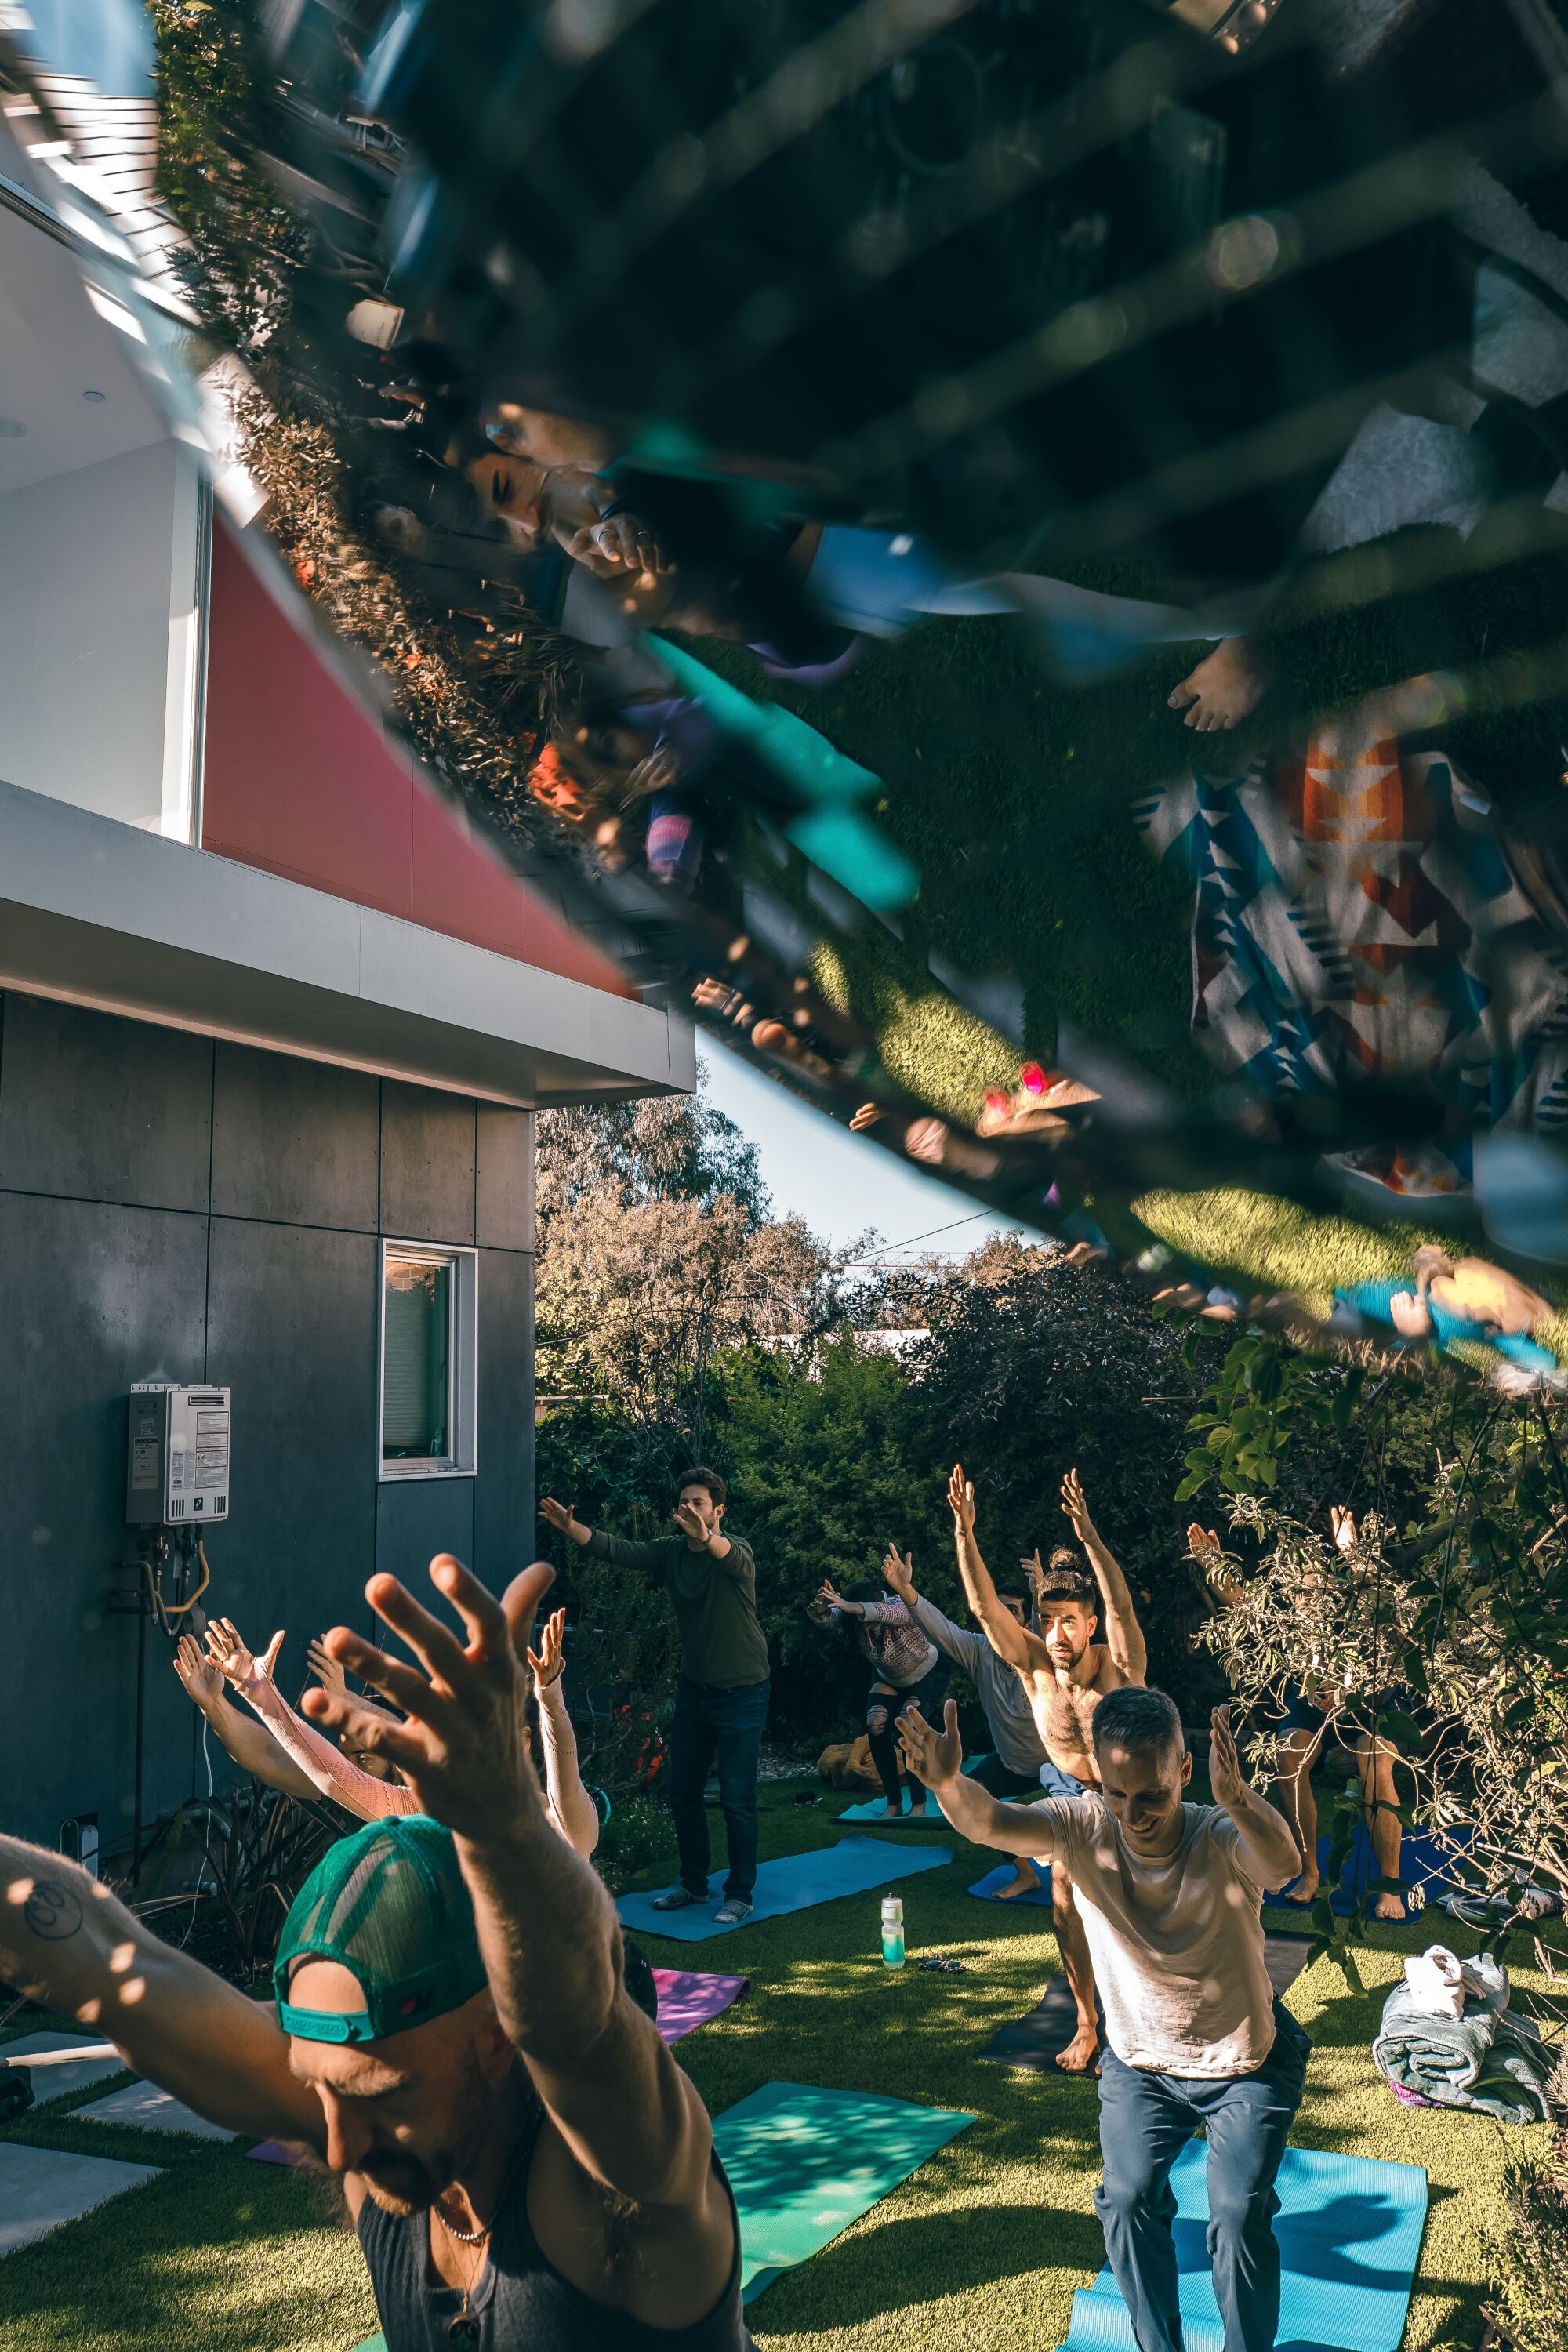 A view of people doing yoga in a backyard, which is reflected in a disco ball at the edge of the frame.